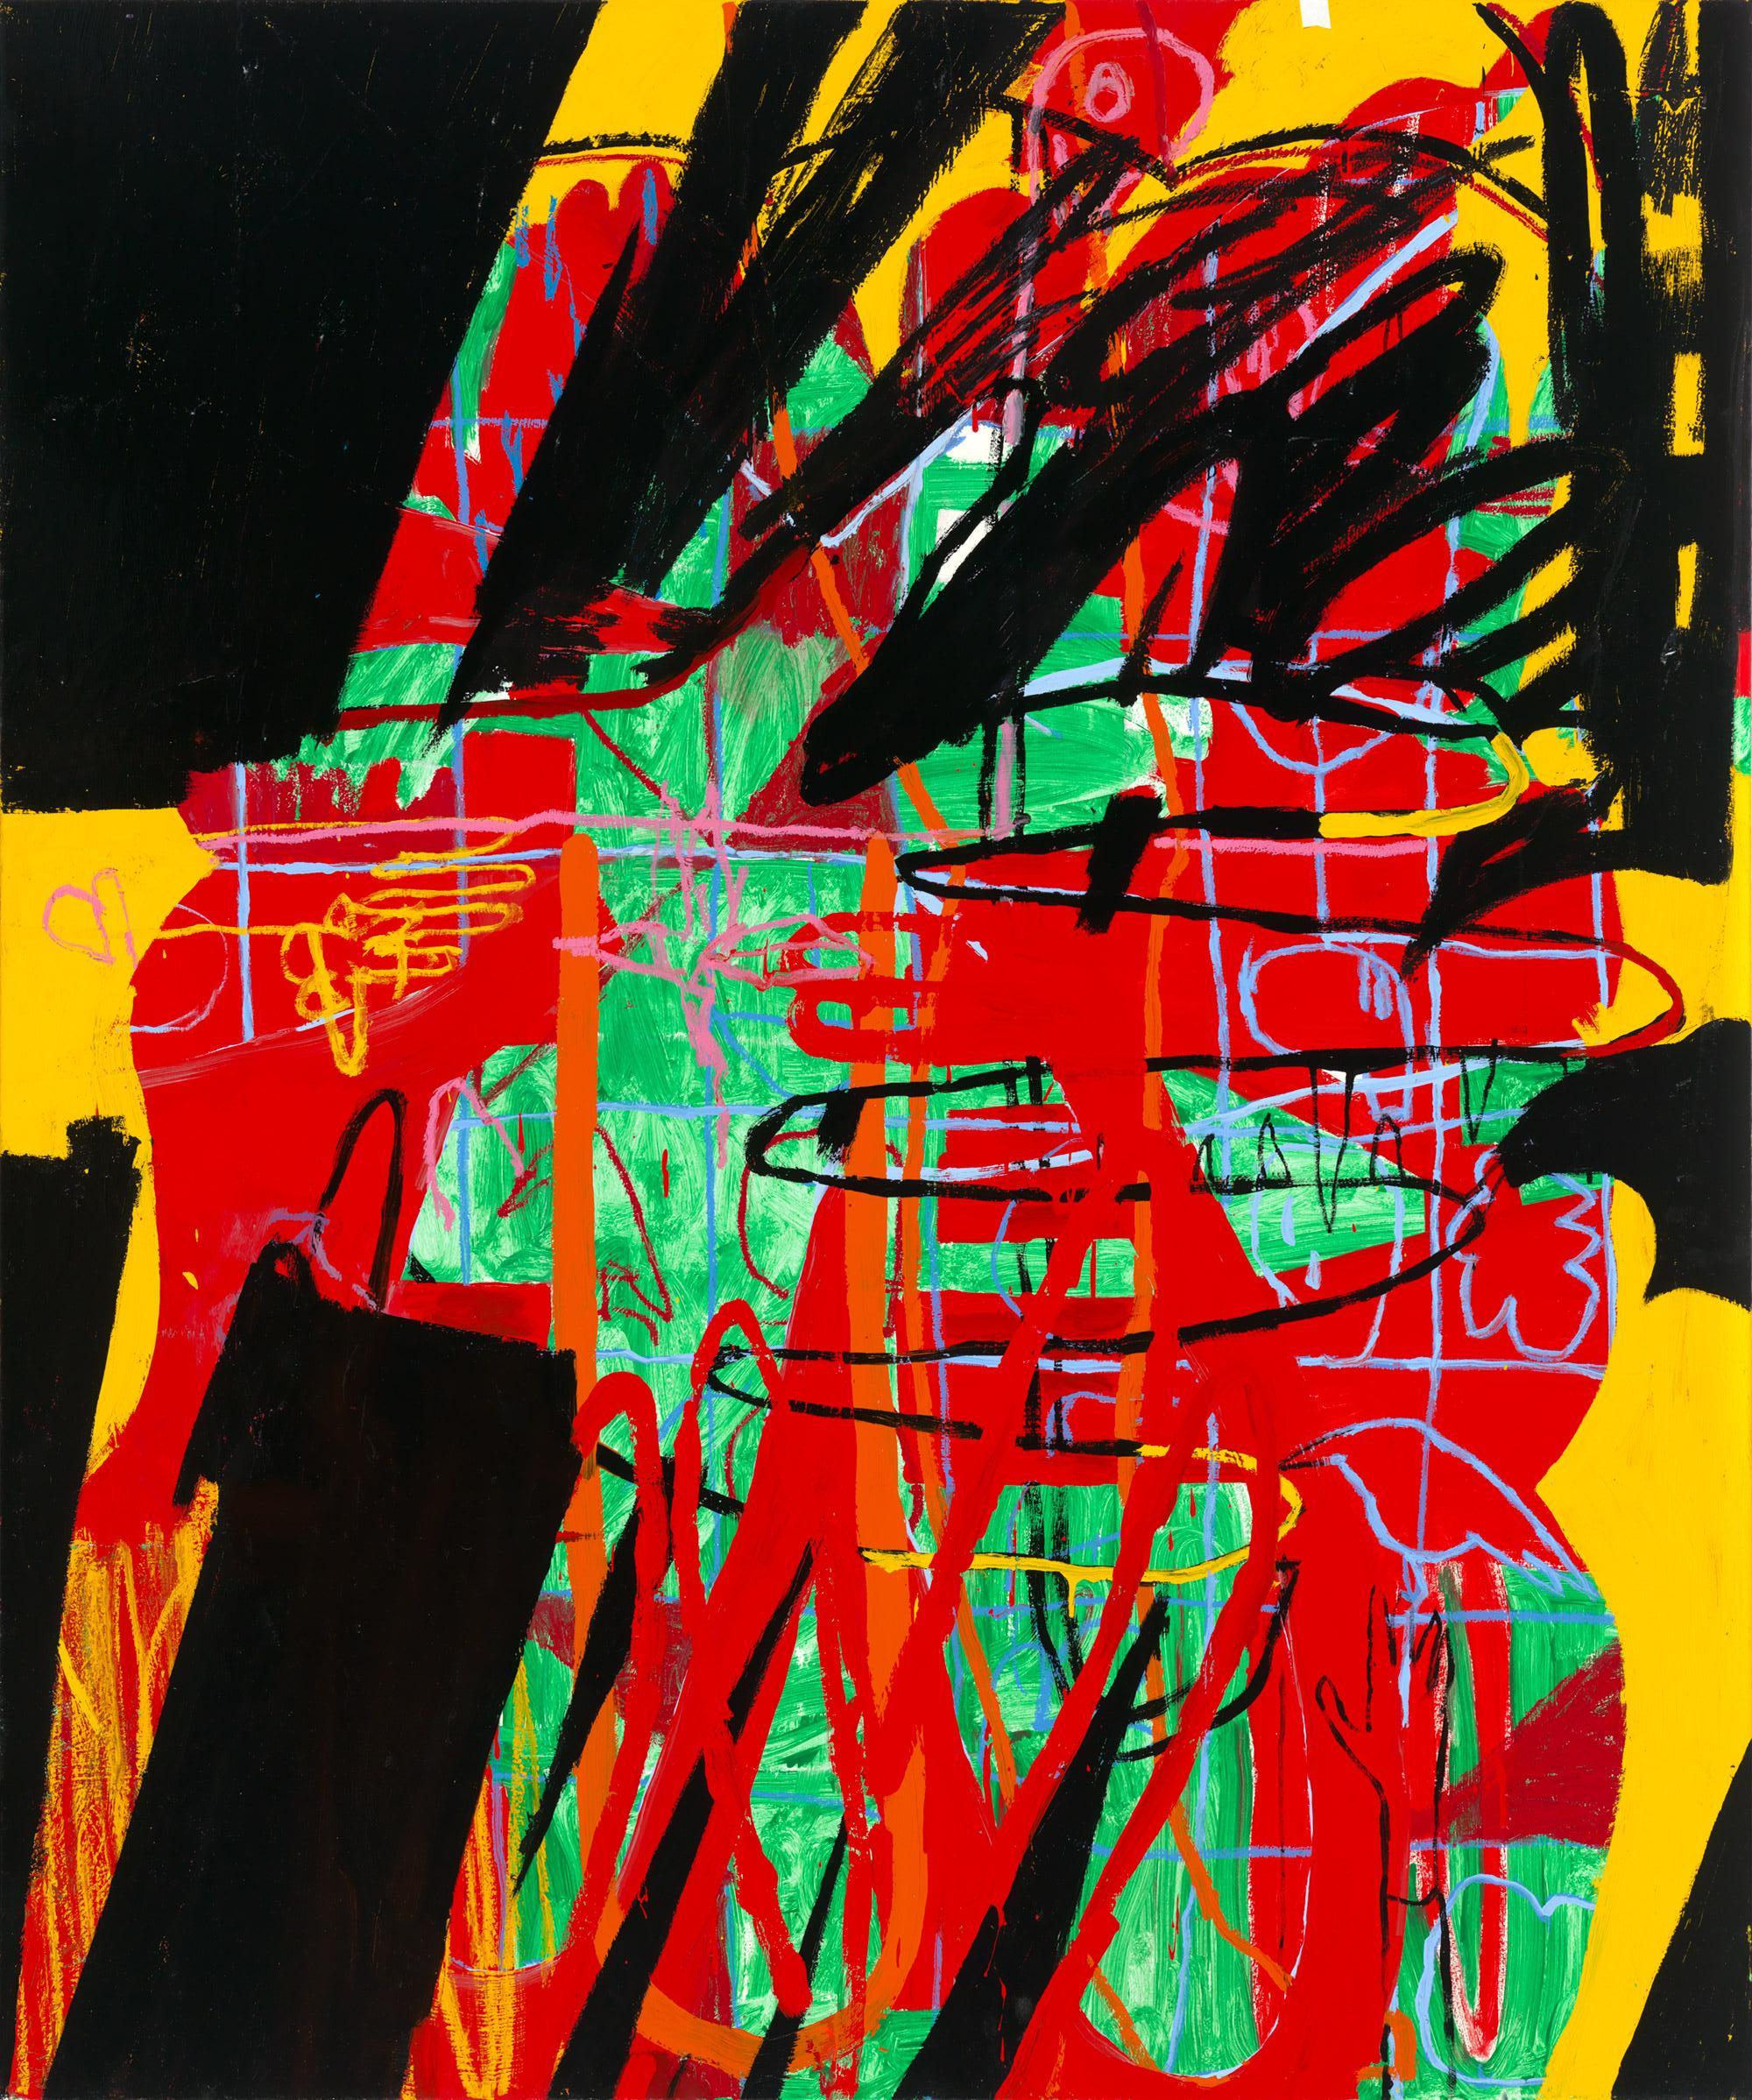 Javier Arizmendi-Kalb Abstract Painting - Hamsa - 72 x 60 inches - abstract expressionistic oil on canvas